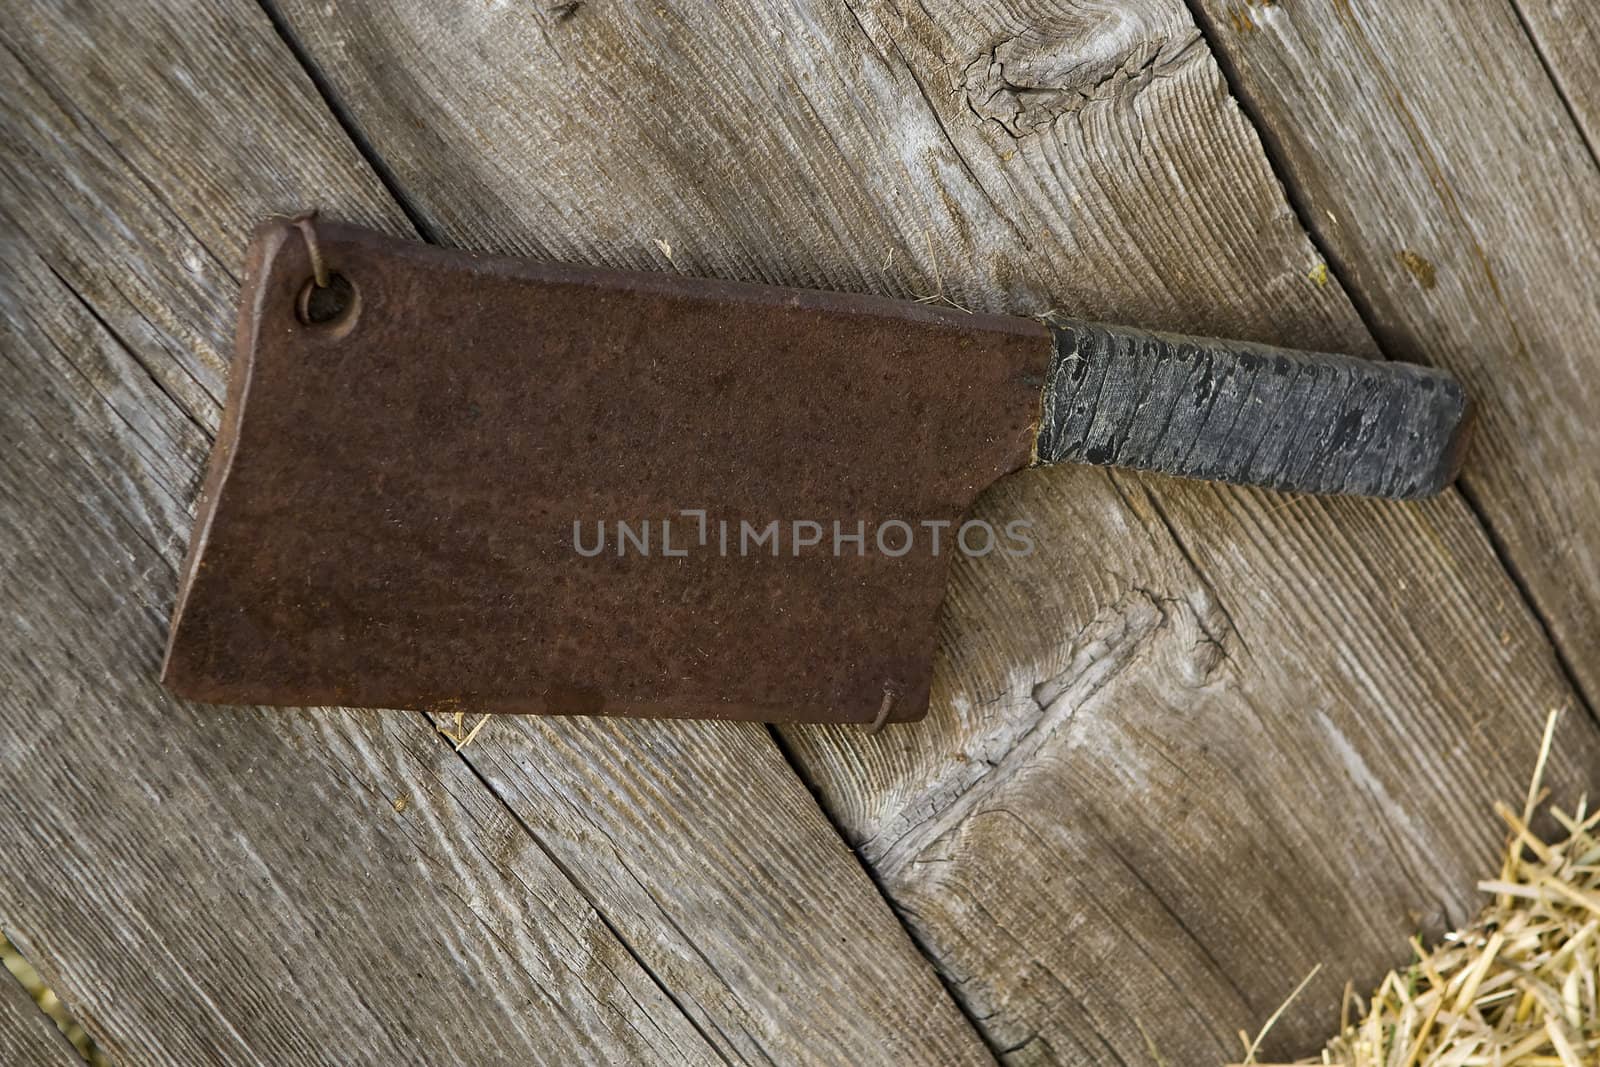 Old rusty meat cleaver by Coffee999